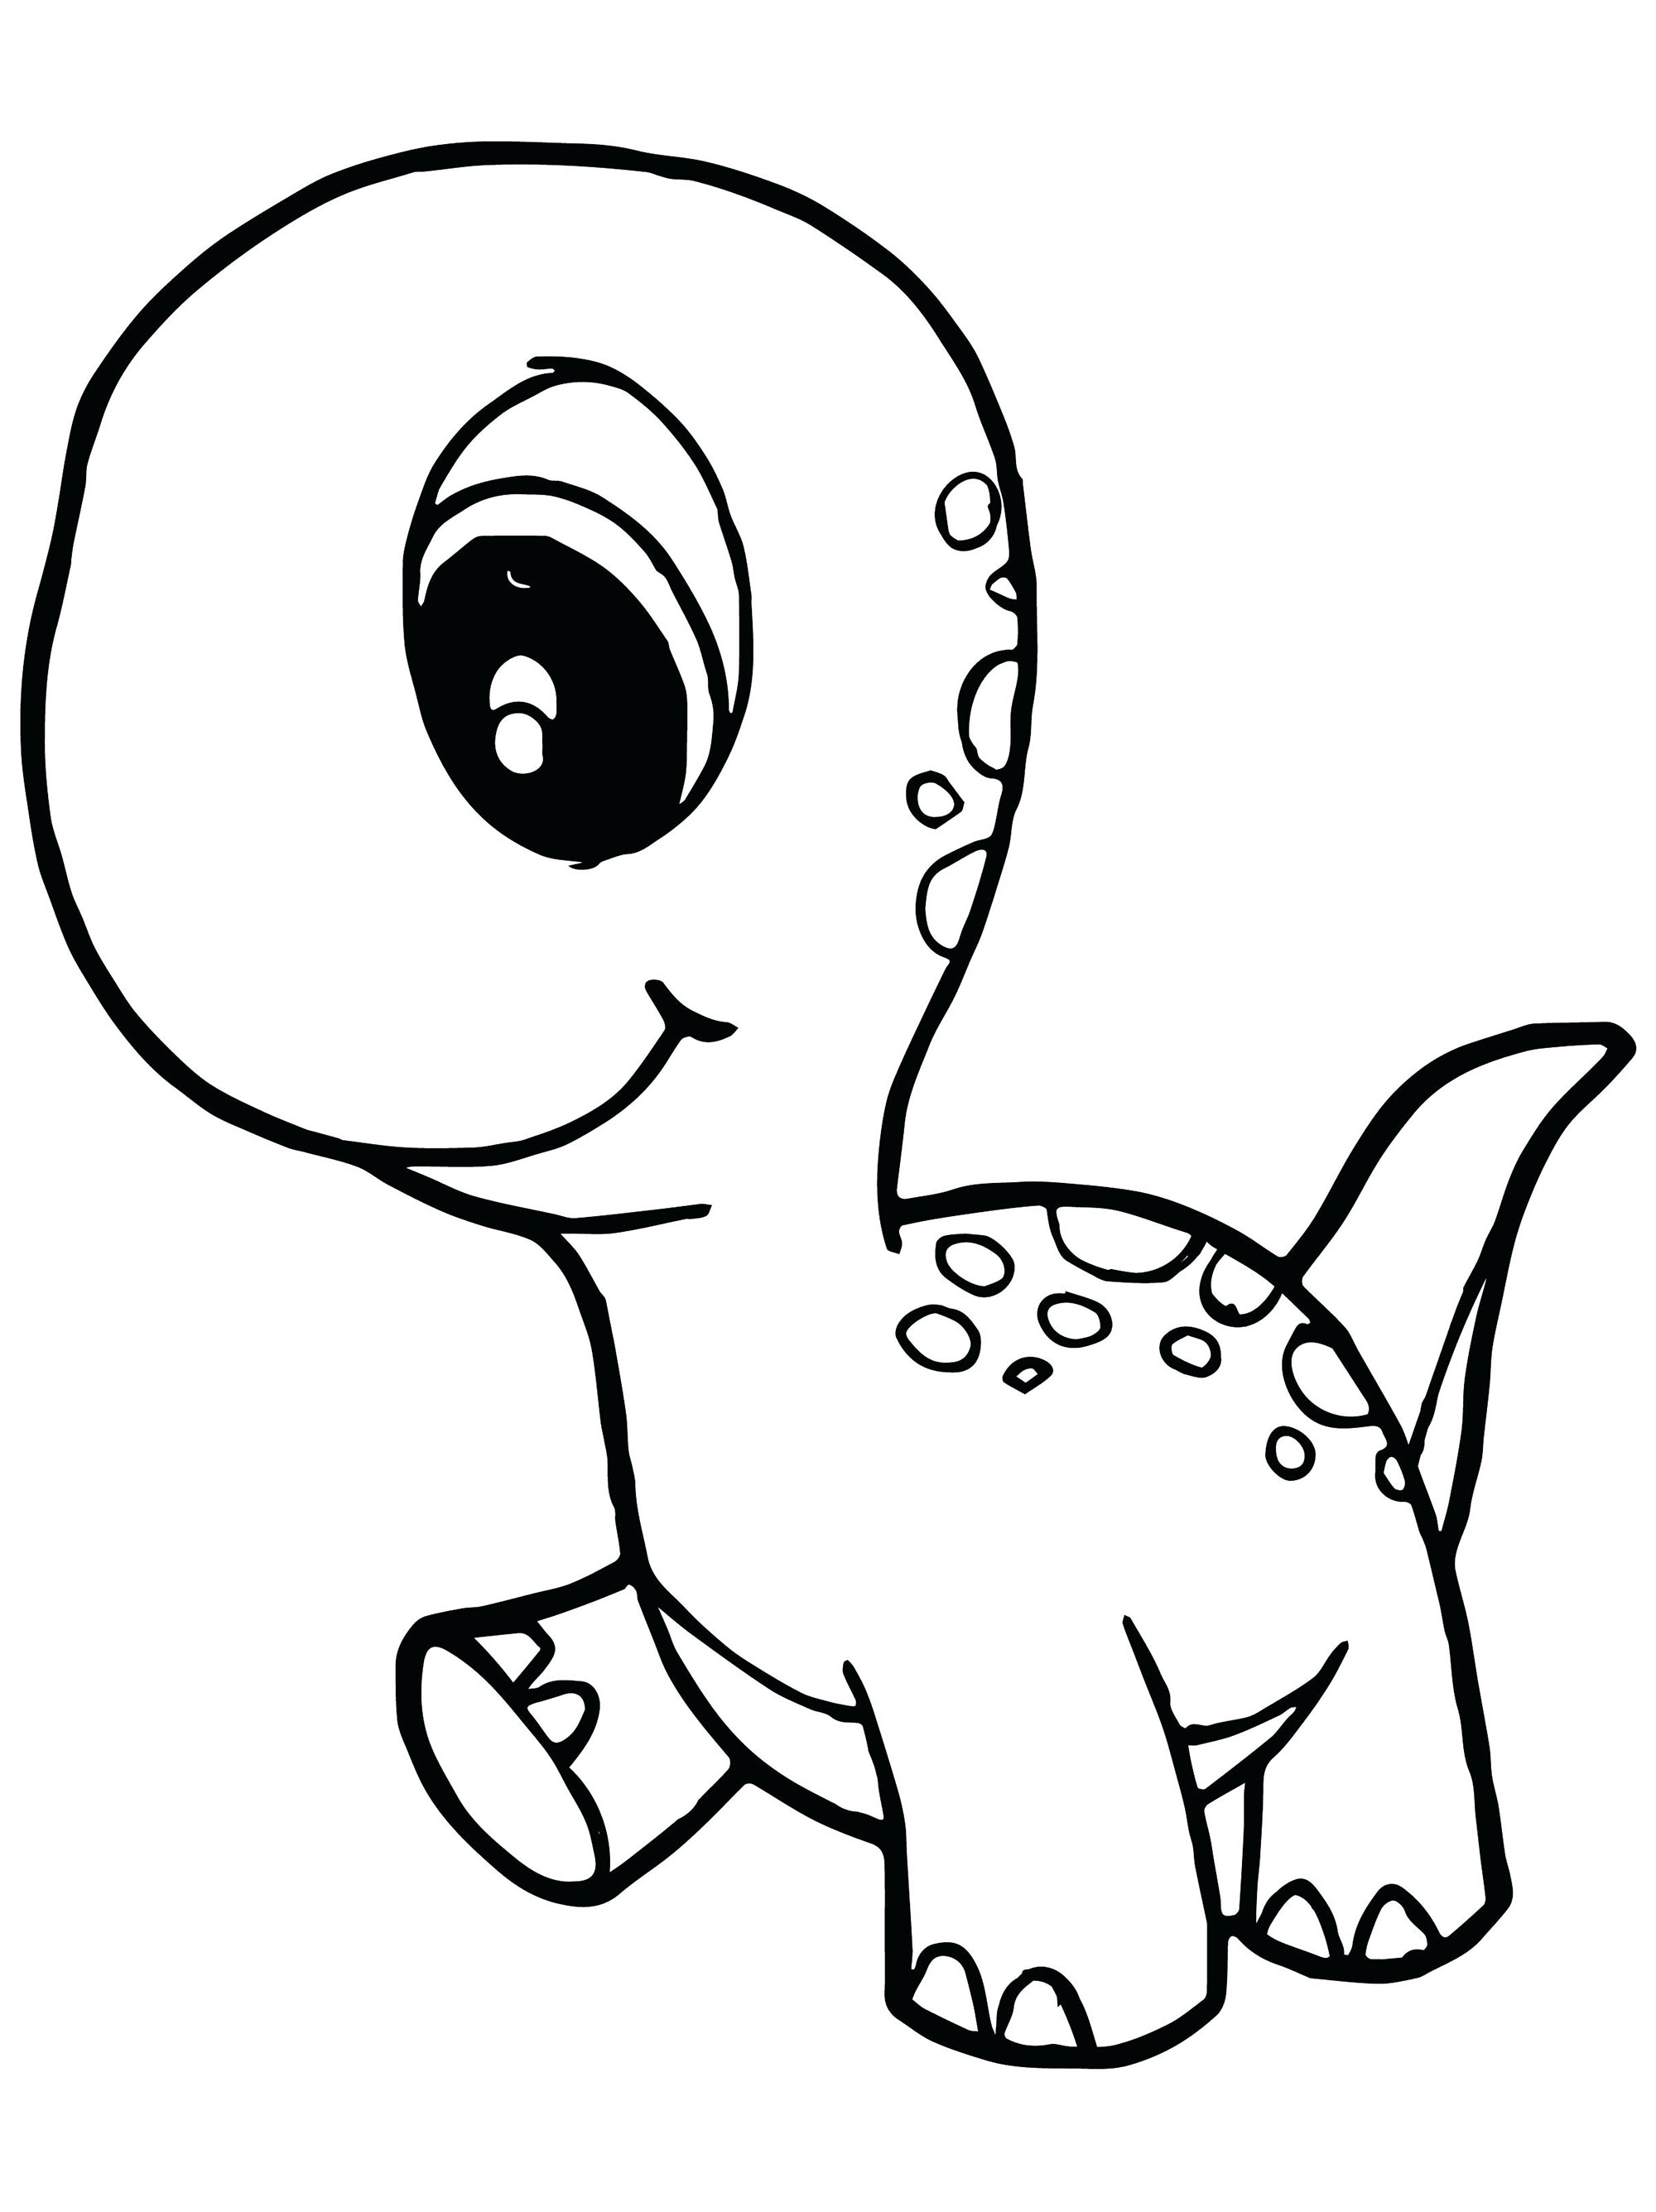 Easy Dinosaur Coloring Pages Printable  Coloring and Drawing